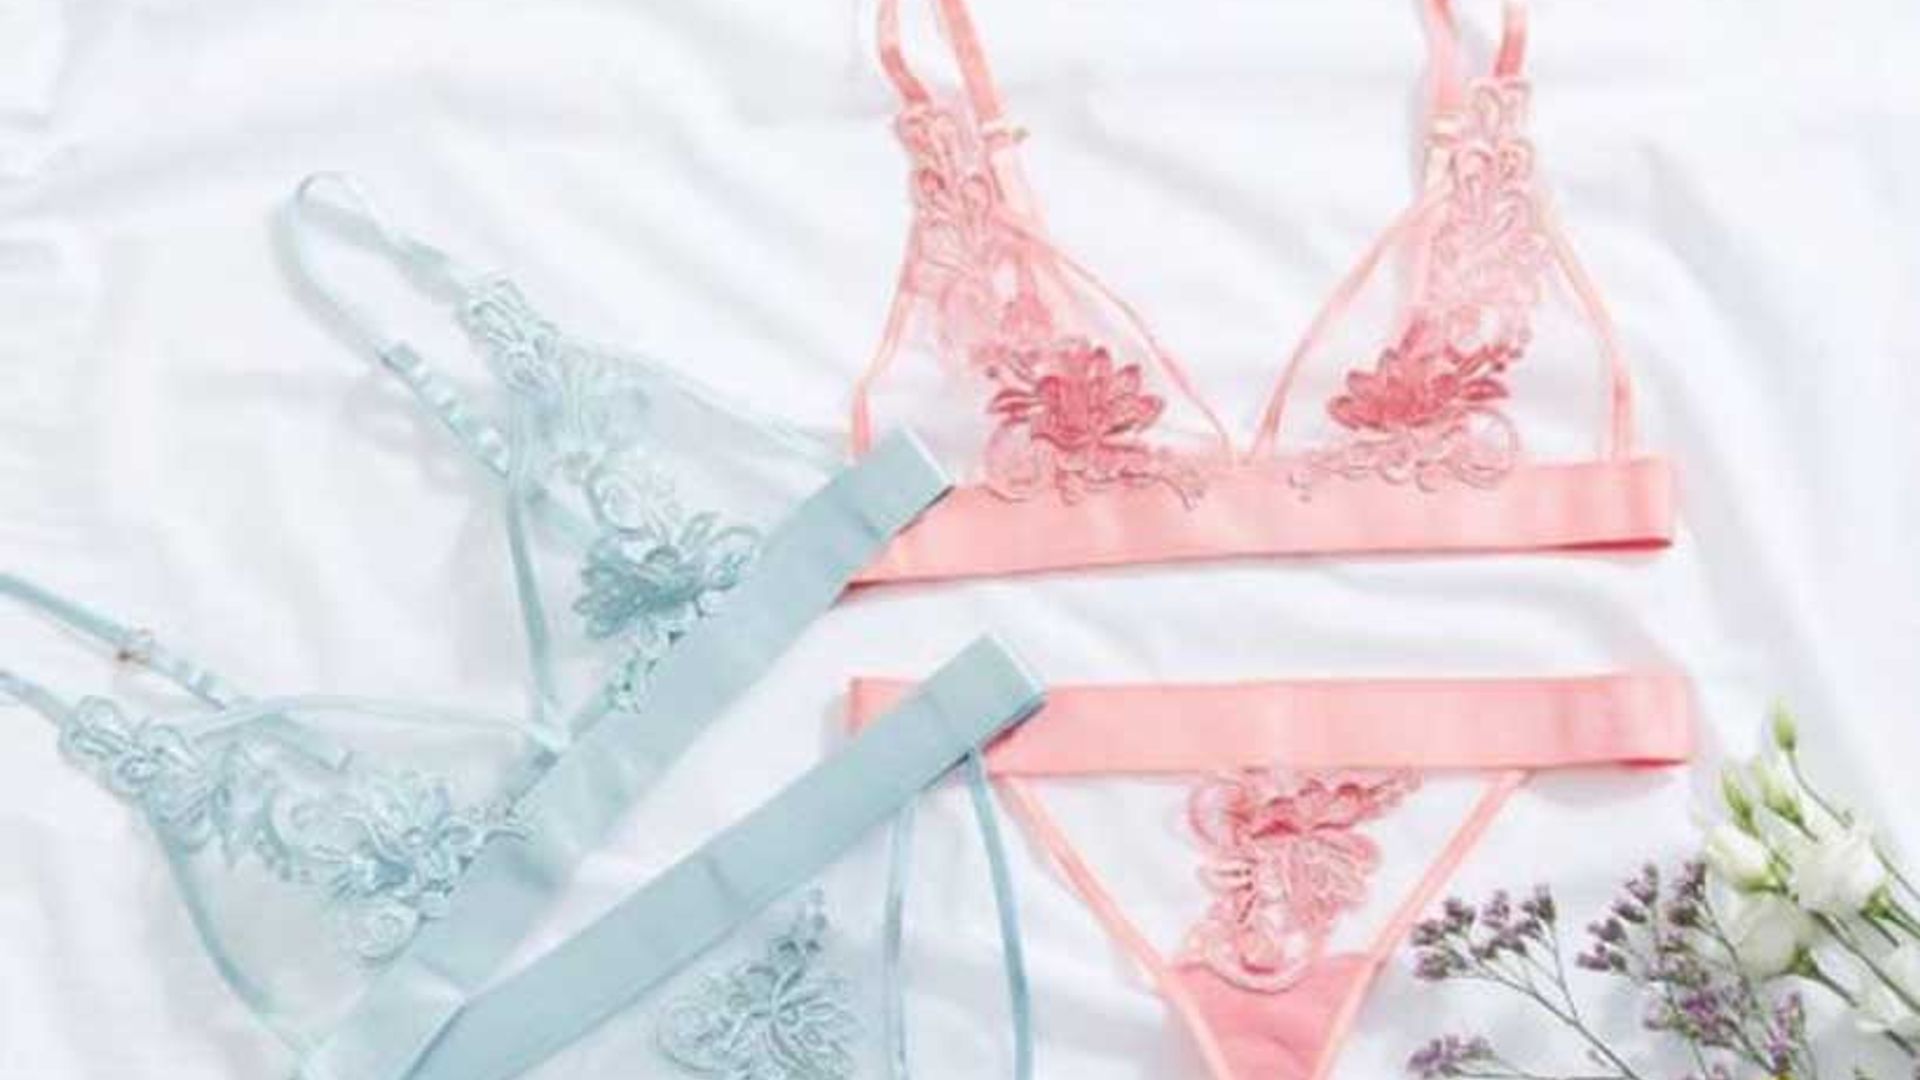 Primark on X: Treat yourself to some beautiful lingerie this